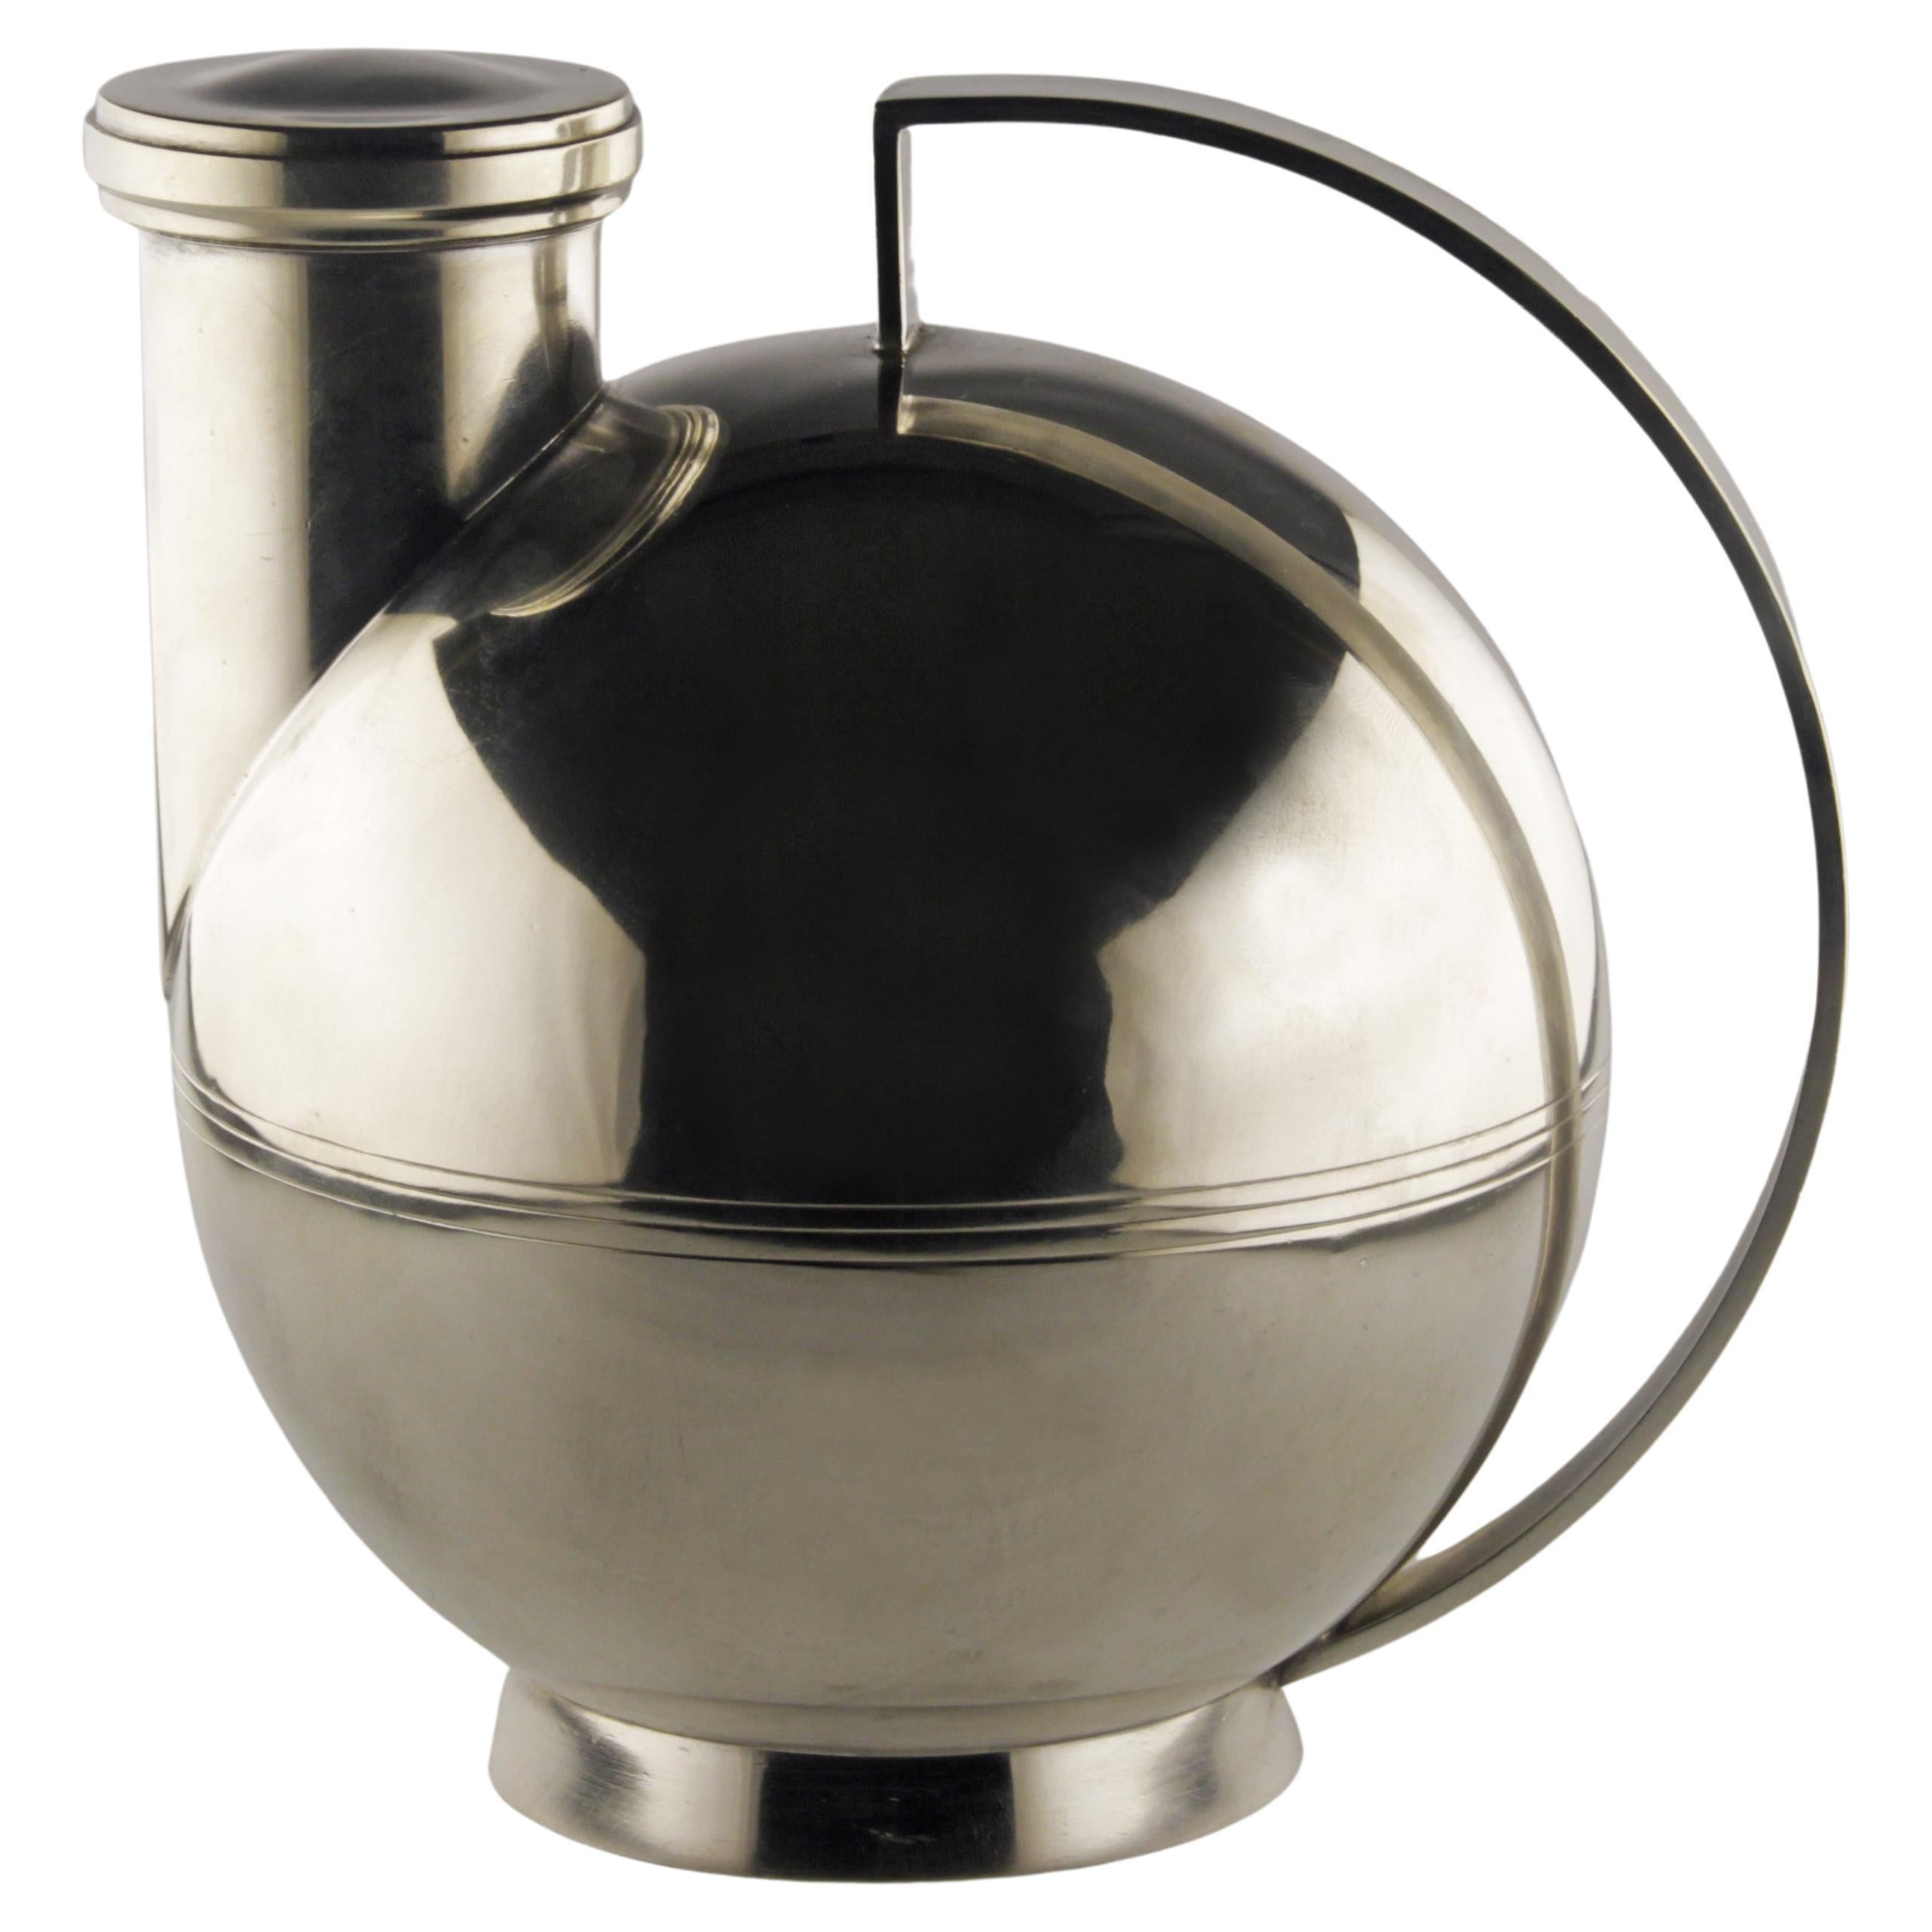 Art Déco/Modernist Silver Spherical Cocktail Shaker by Swedish Sylvia Stave